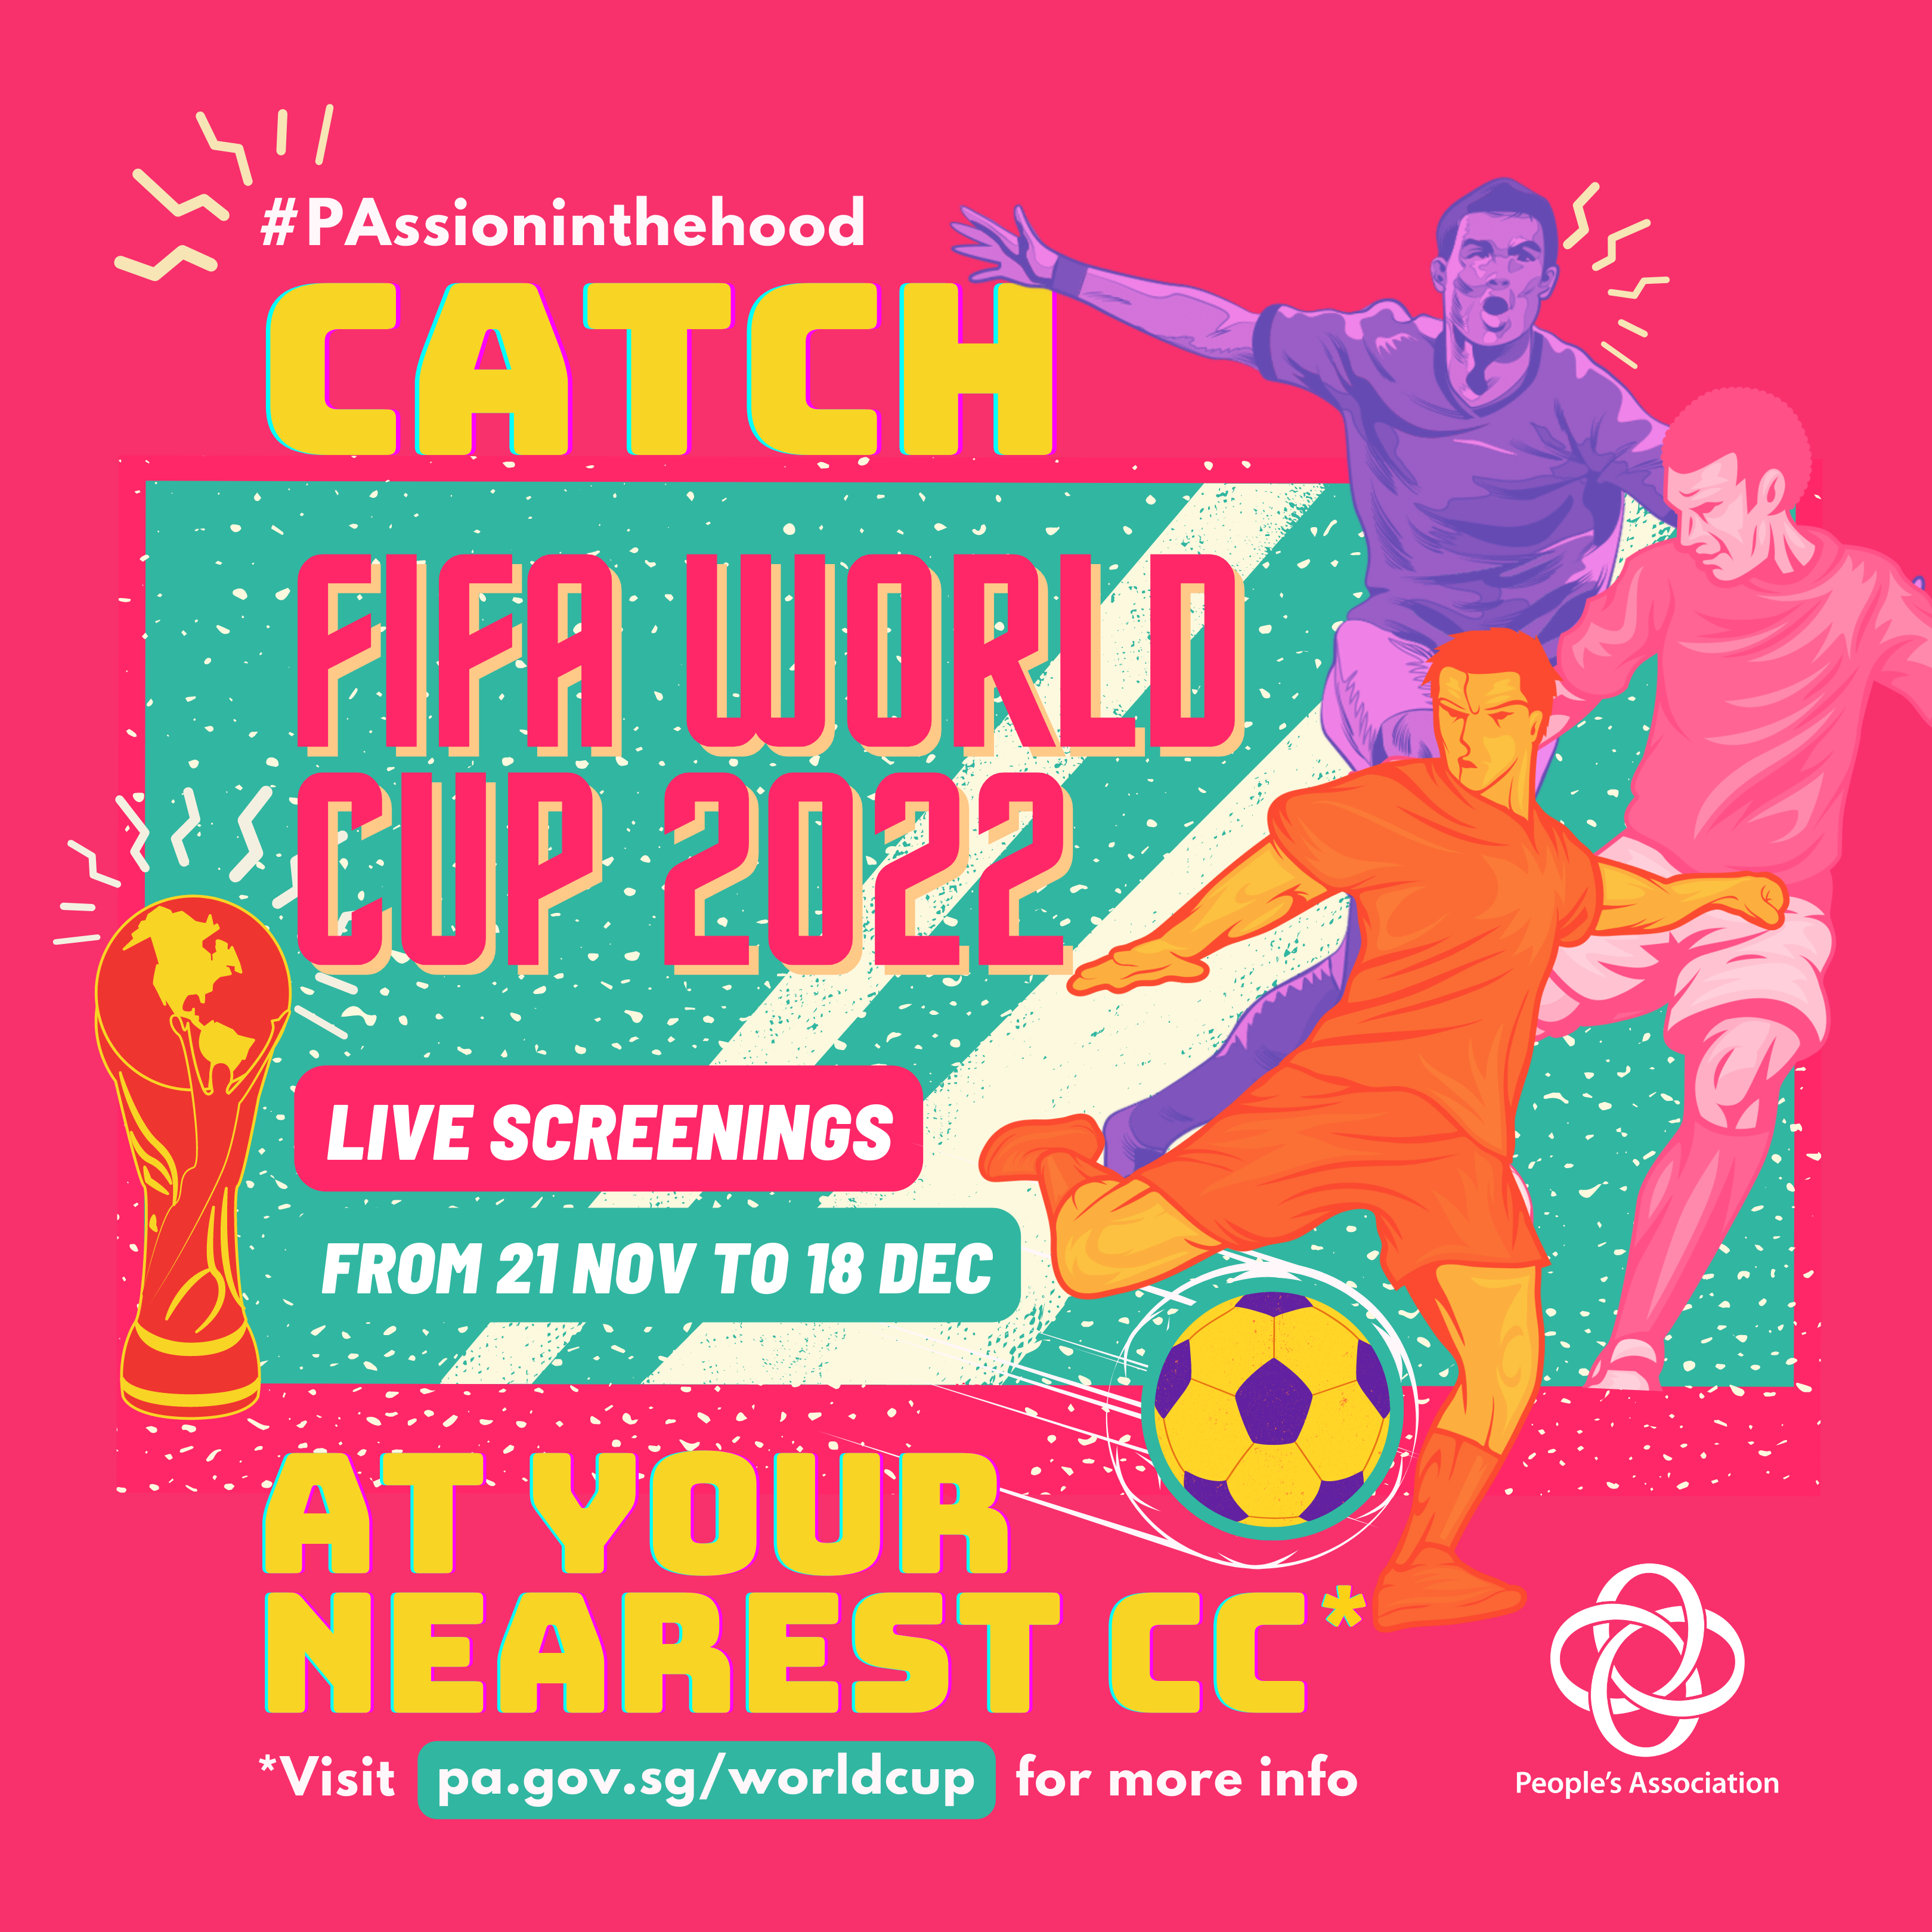 Live screenings of FIFA World Cup 2022 matches at CCs across Singapore